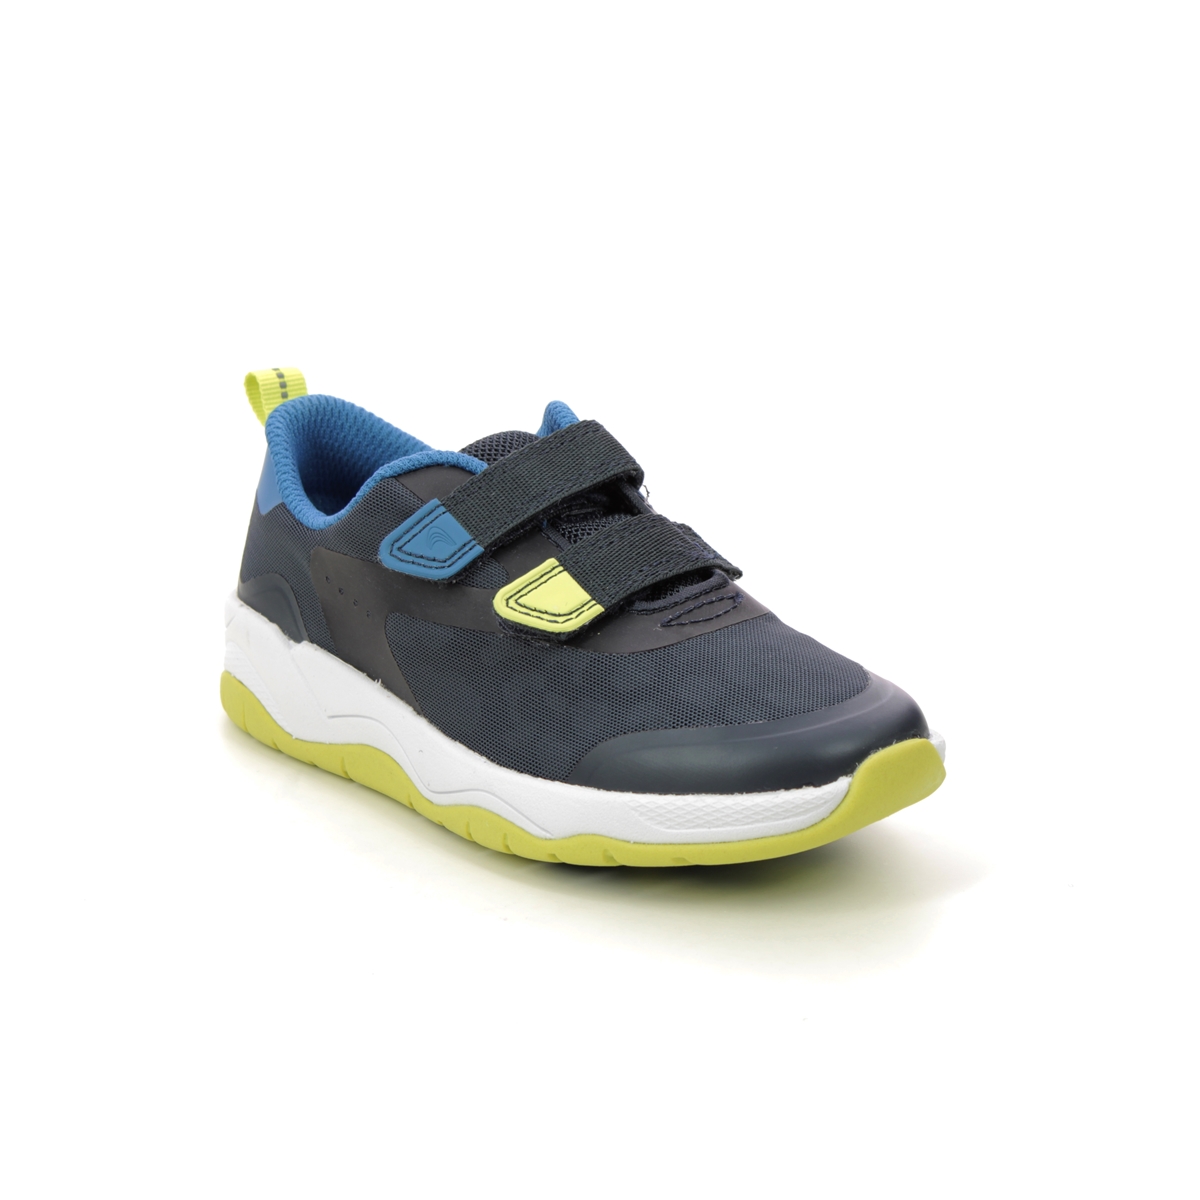 Clarks Clowder Race K Navy Kids Boys Trainers 6629-26F in a Plain Man-made in Size 9.5